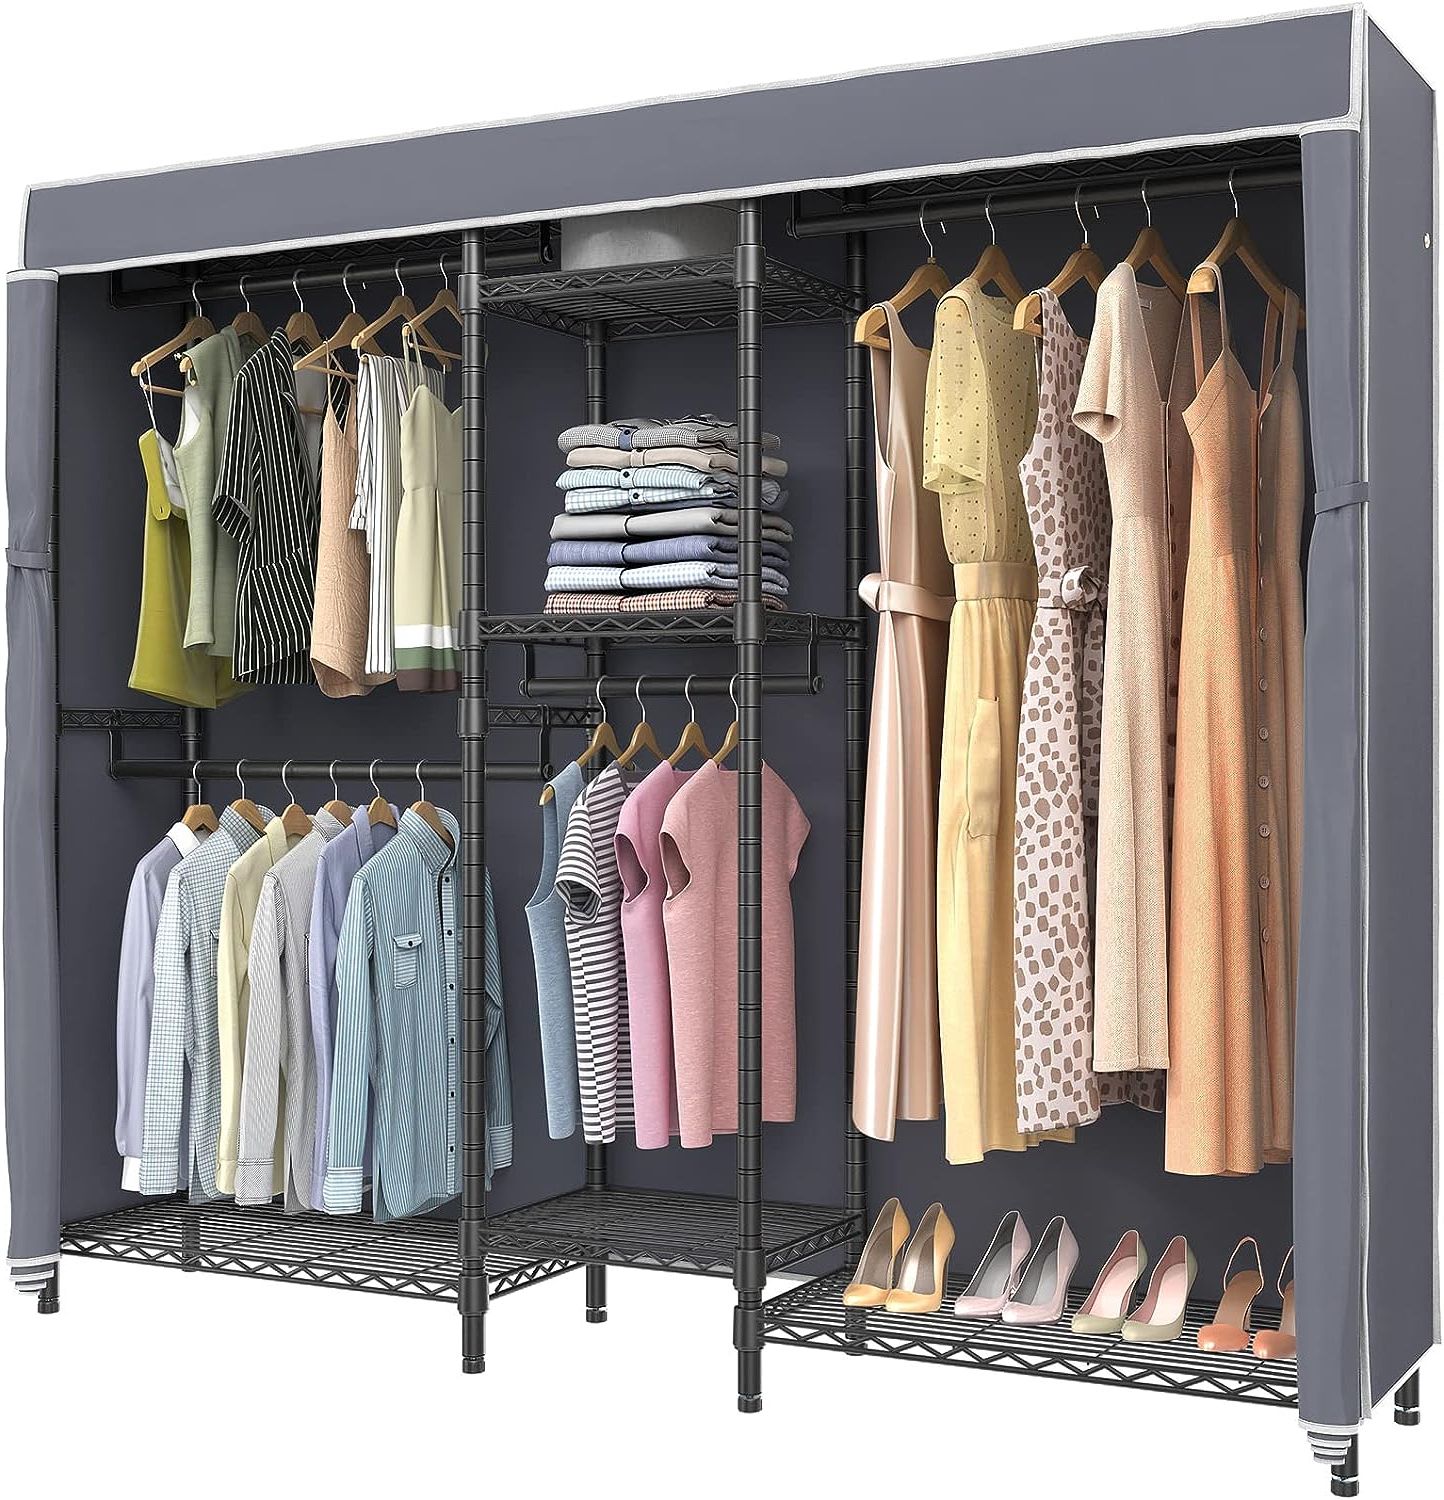 Vipek V6c Wire Garment Rack 5 Tiers Heavy Duty Italy | Ubuy Pertaining To Wardrobes With Cover Clothes Rack (Gallery 2 of 20)